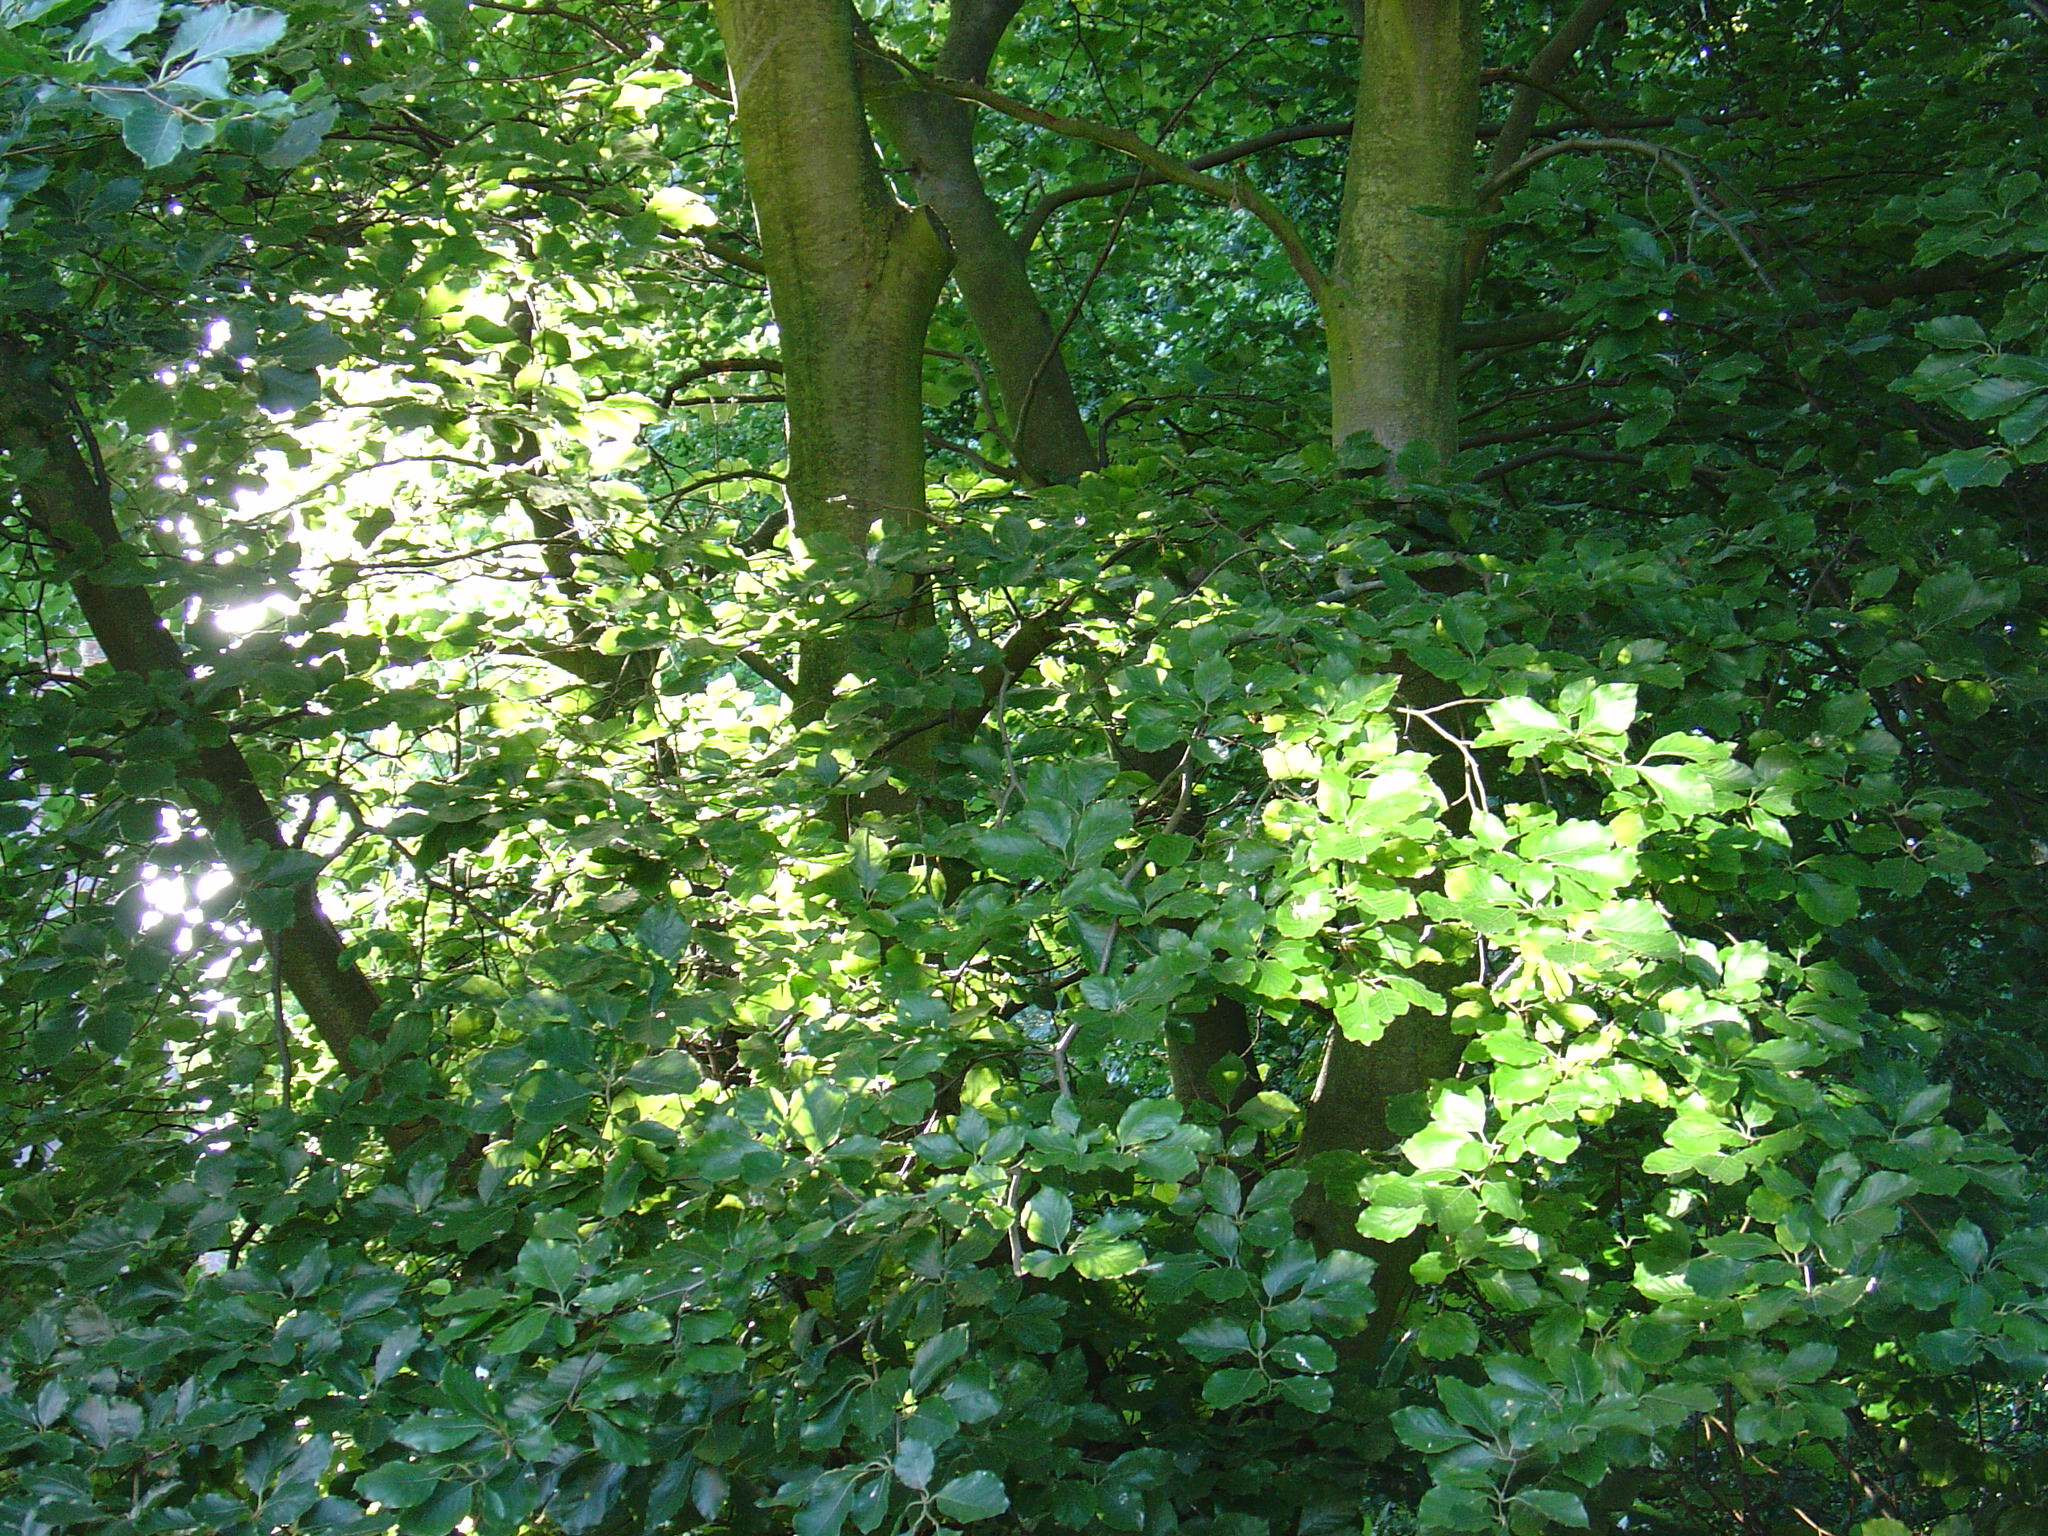 a large patch of green foliage in front of trees